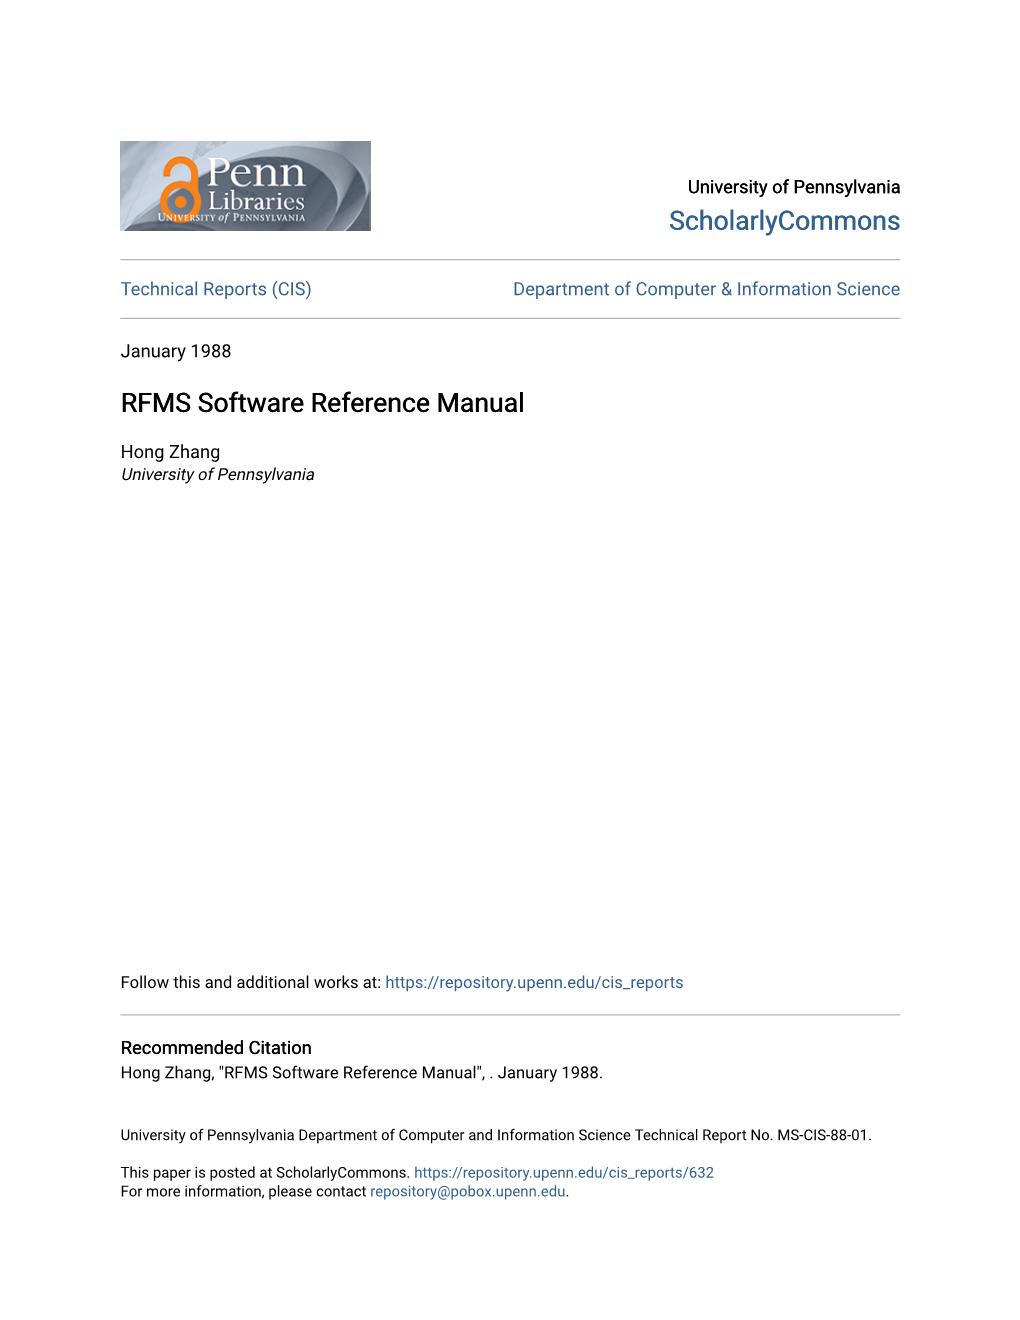 RFMS Software Reference Manual